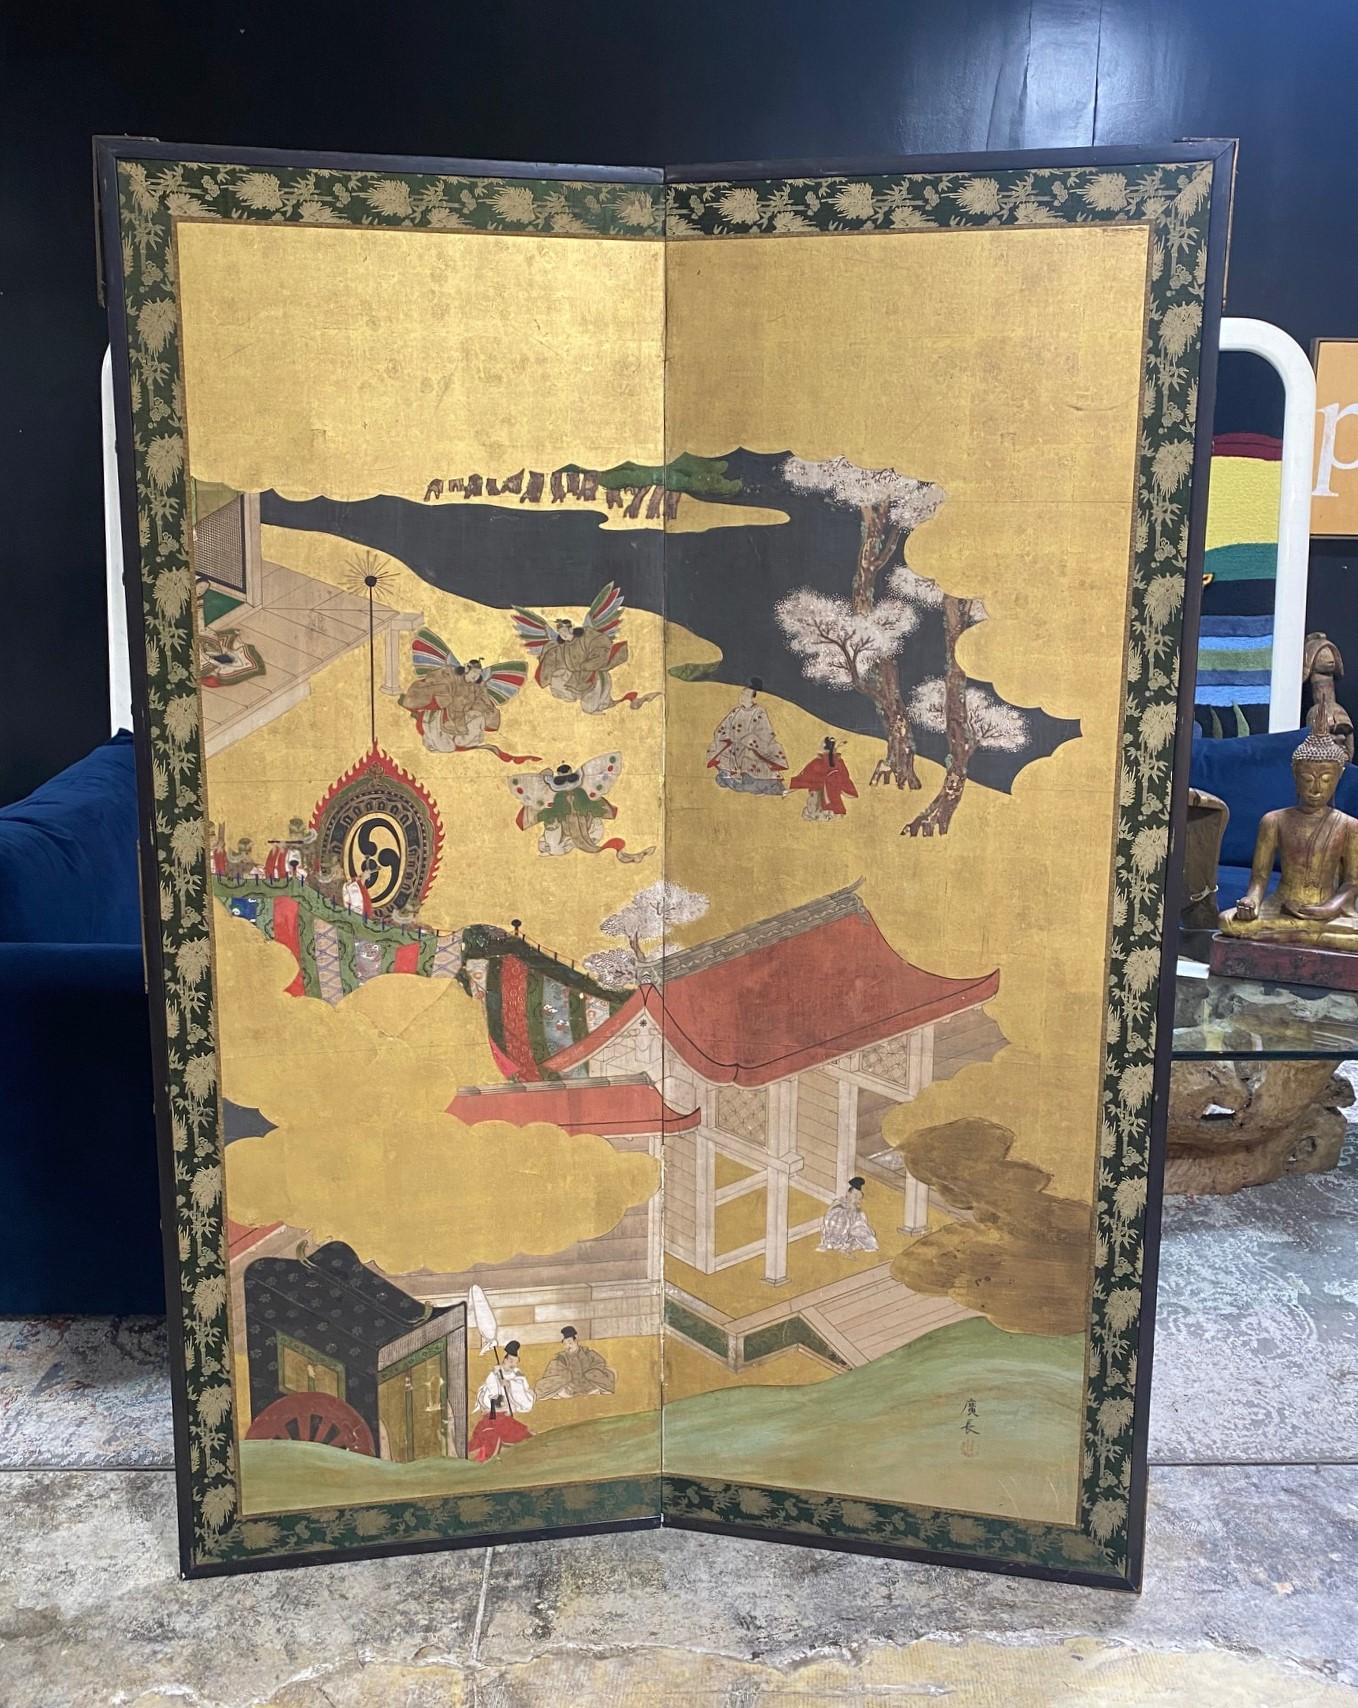 A gorgeous, tall two-panel Japanese Byobu folding screen depicting scenes from the Classic Japanese 11th-century literary work 